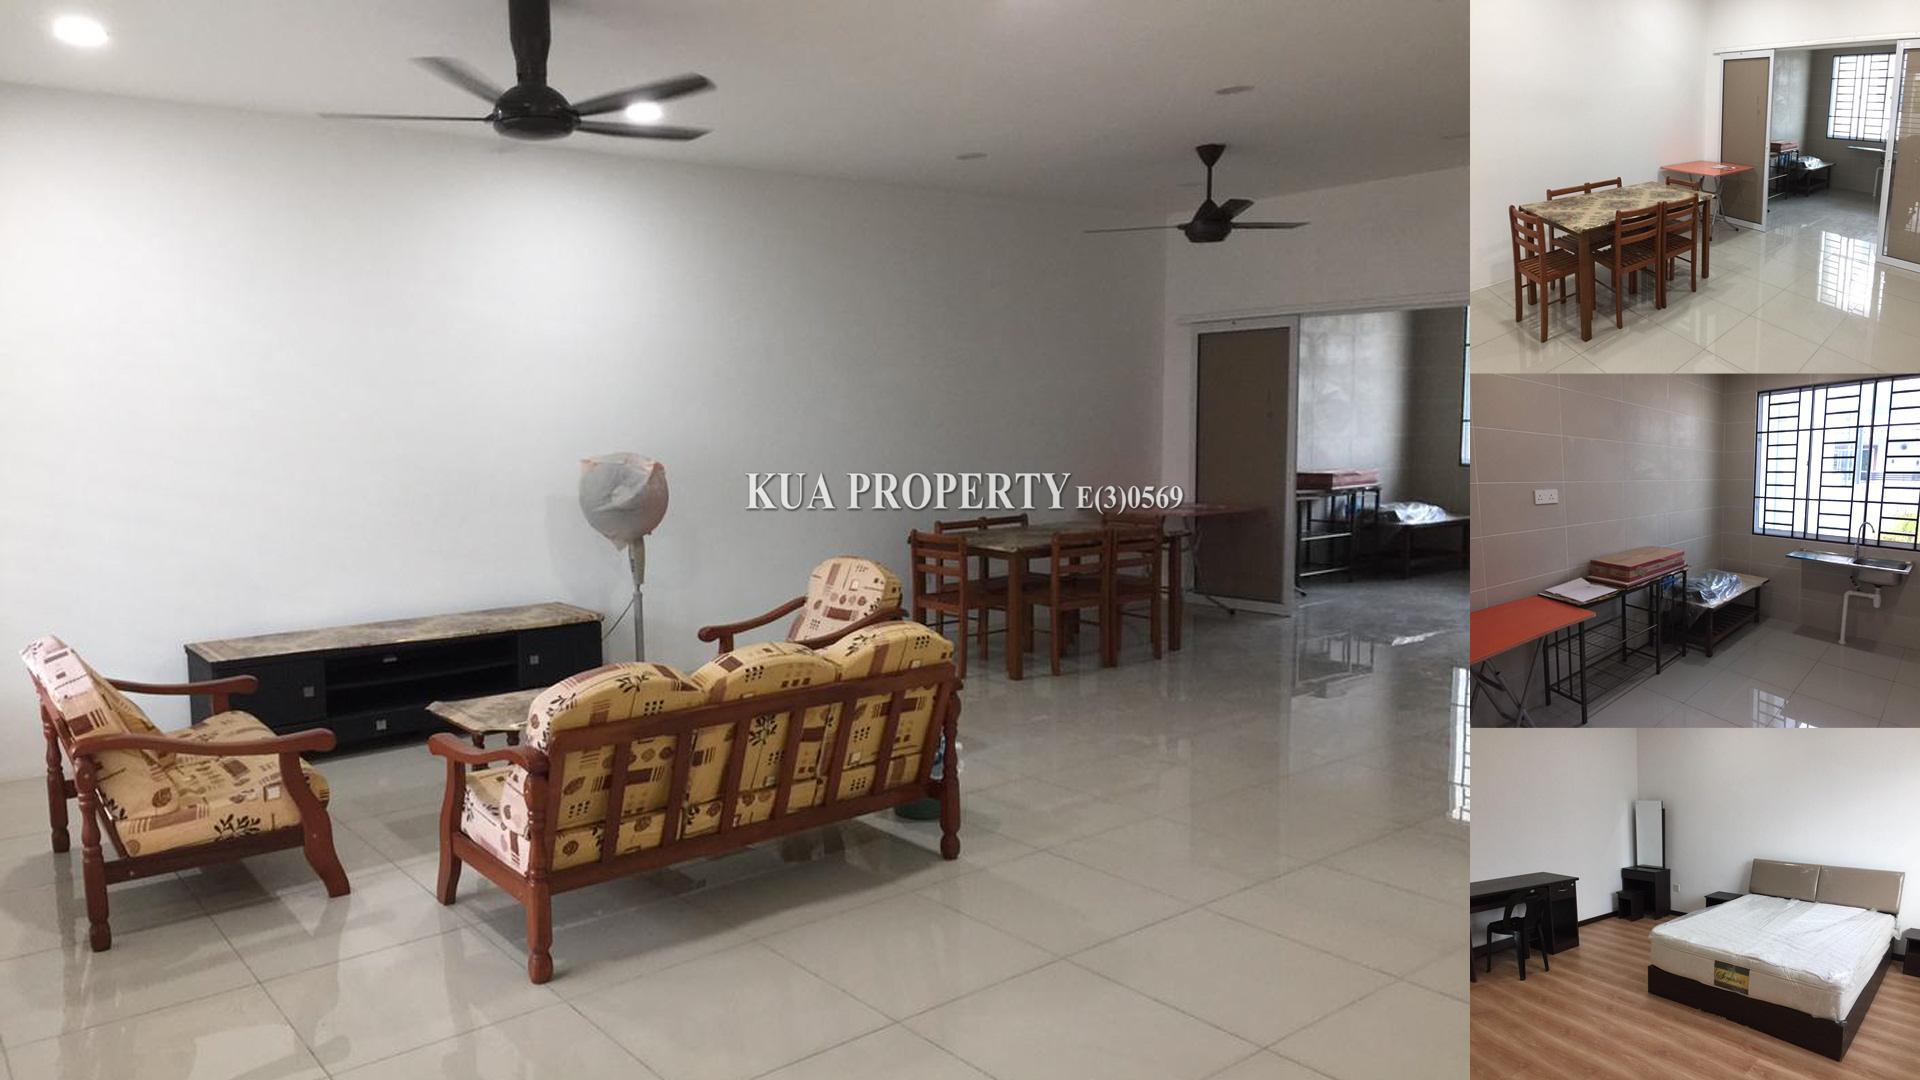 Double Storey Terrace Intermediate House For Rent! at Jalan Sungai Tapang, 7th mile